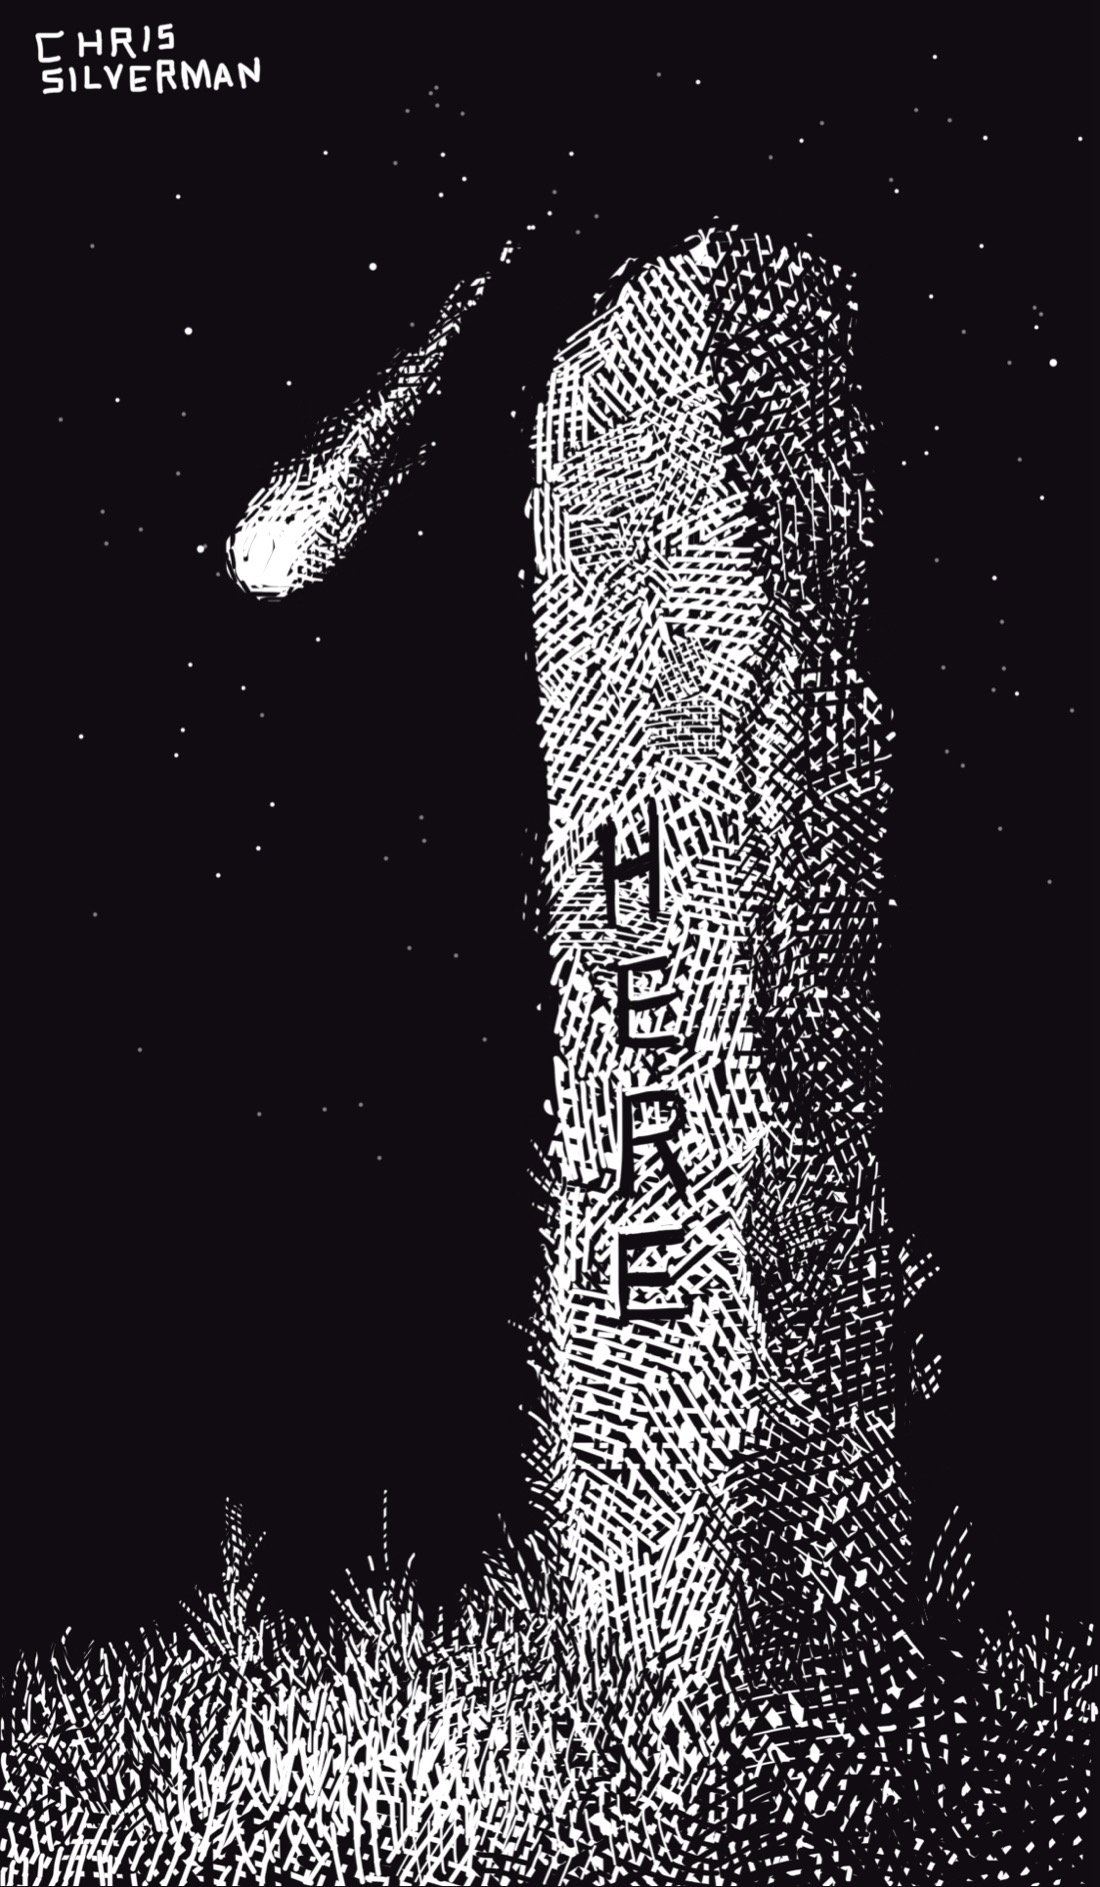 A clear, starry night. In the middle of a meadow stands a tall, boxy stone column with the word "here" carved into it. Visible in the sky behind it is an asteroid flaming towards earth, presumably headed for the designated landing spot.